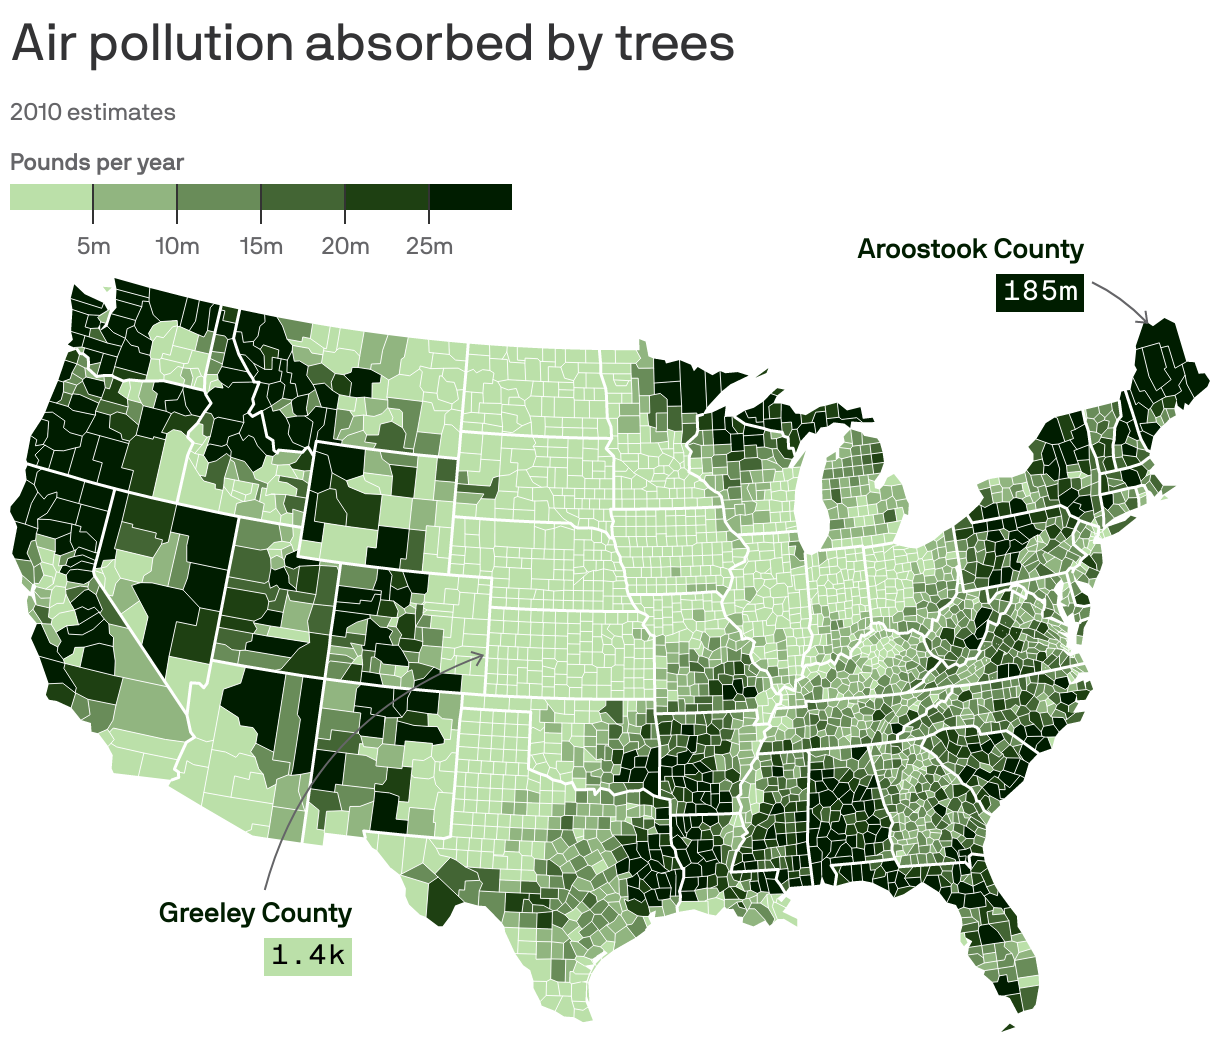 Air pollution absorbed by trees